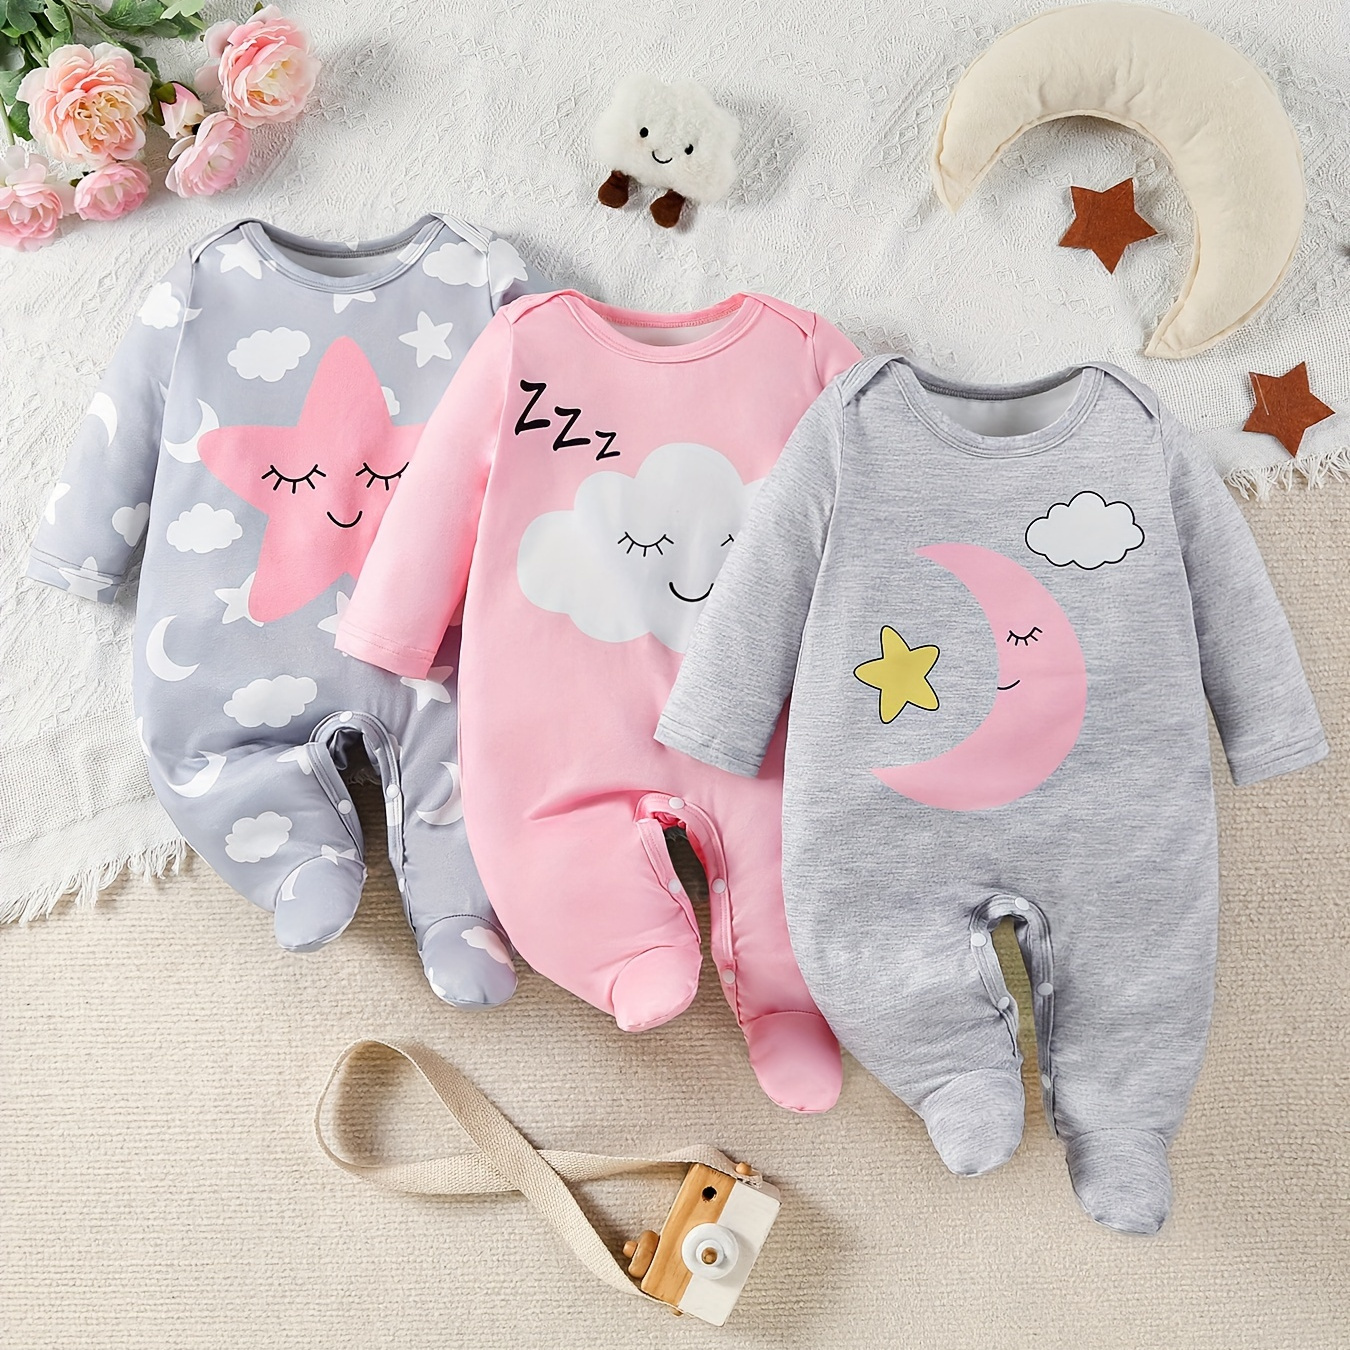 

3pcs Newborn Baby's Cloud Pattern Footed Bodysuit, Casual Long Sleeve Romper, Toddler & Infant Girl's Onesie, As Gift